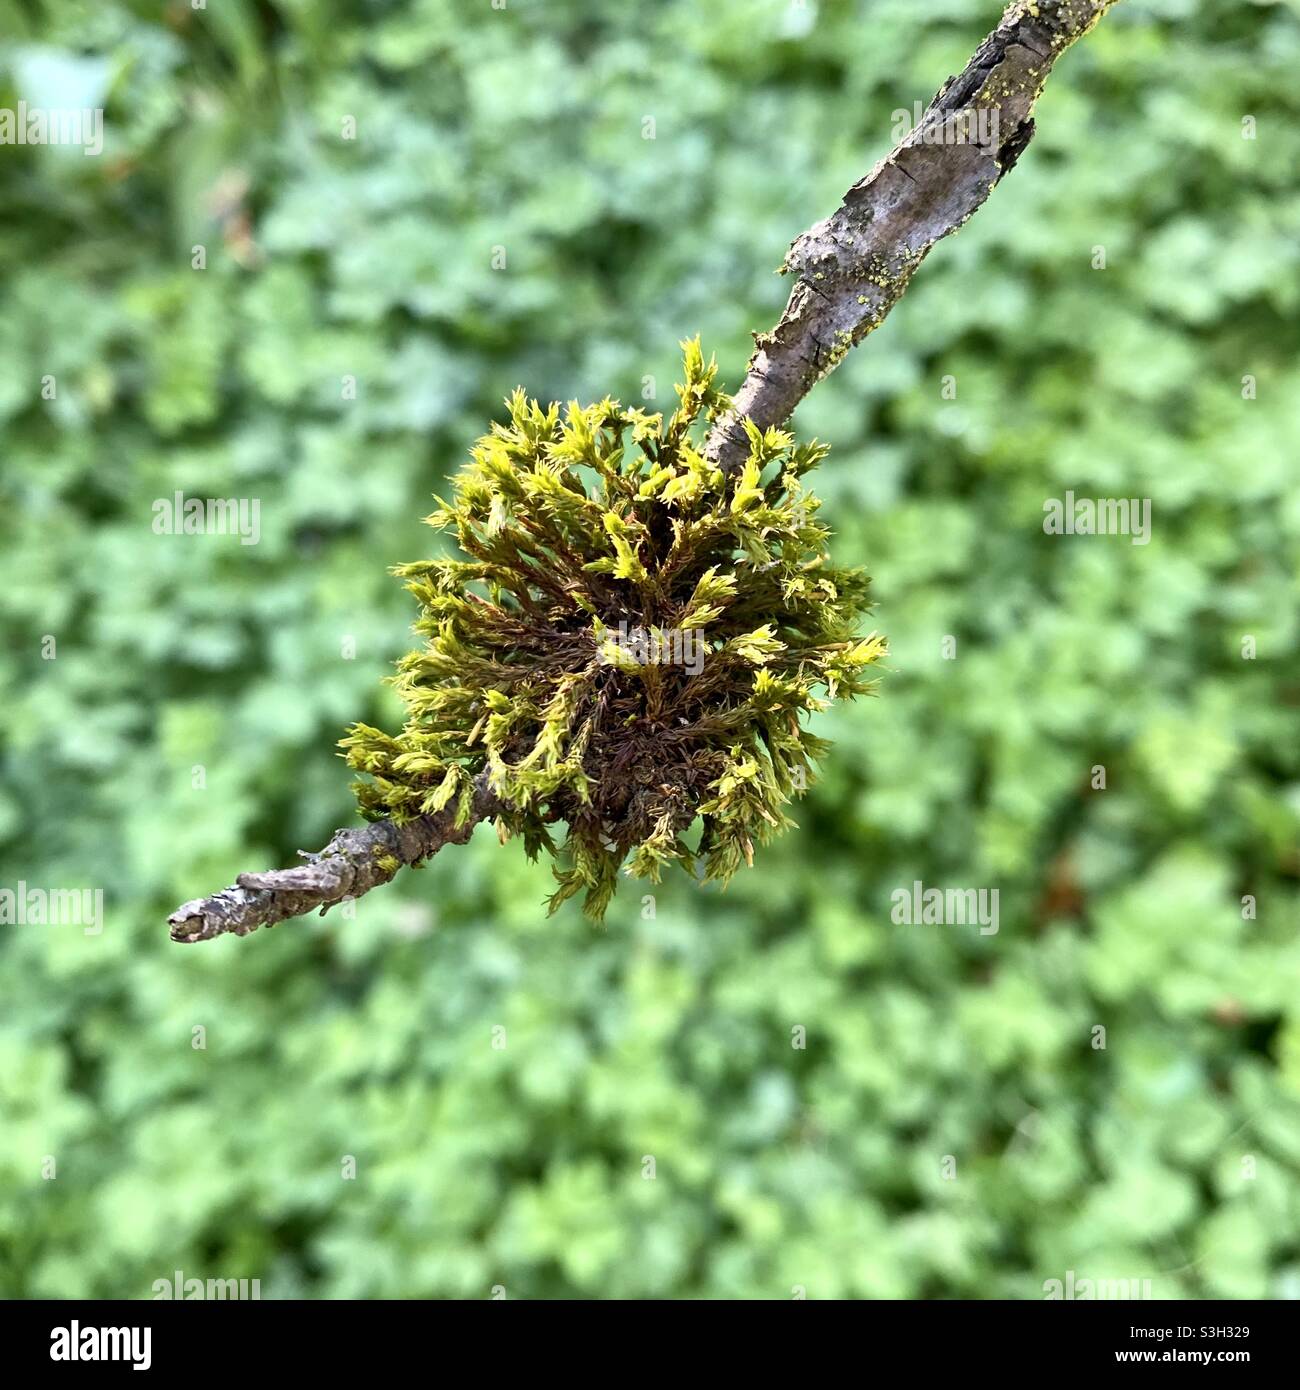 Moss growing on a tree branch Stock Photo